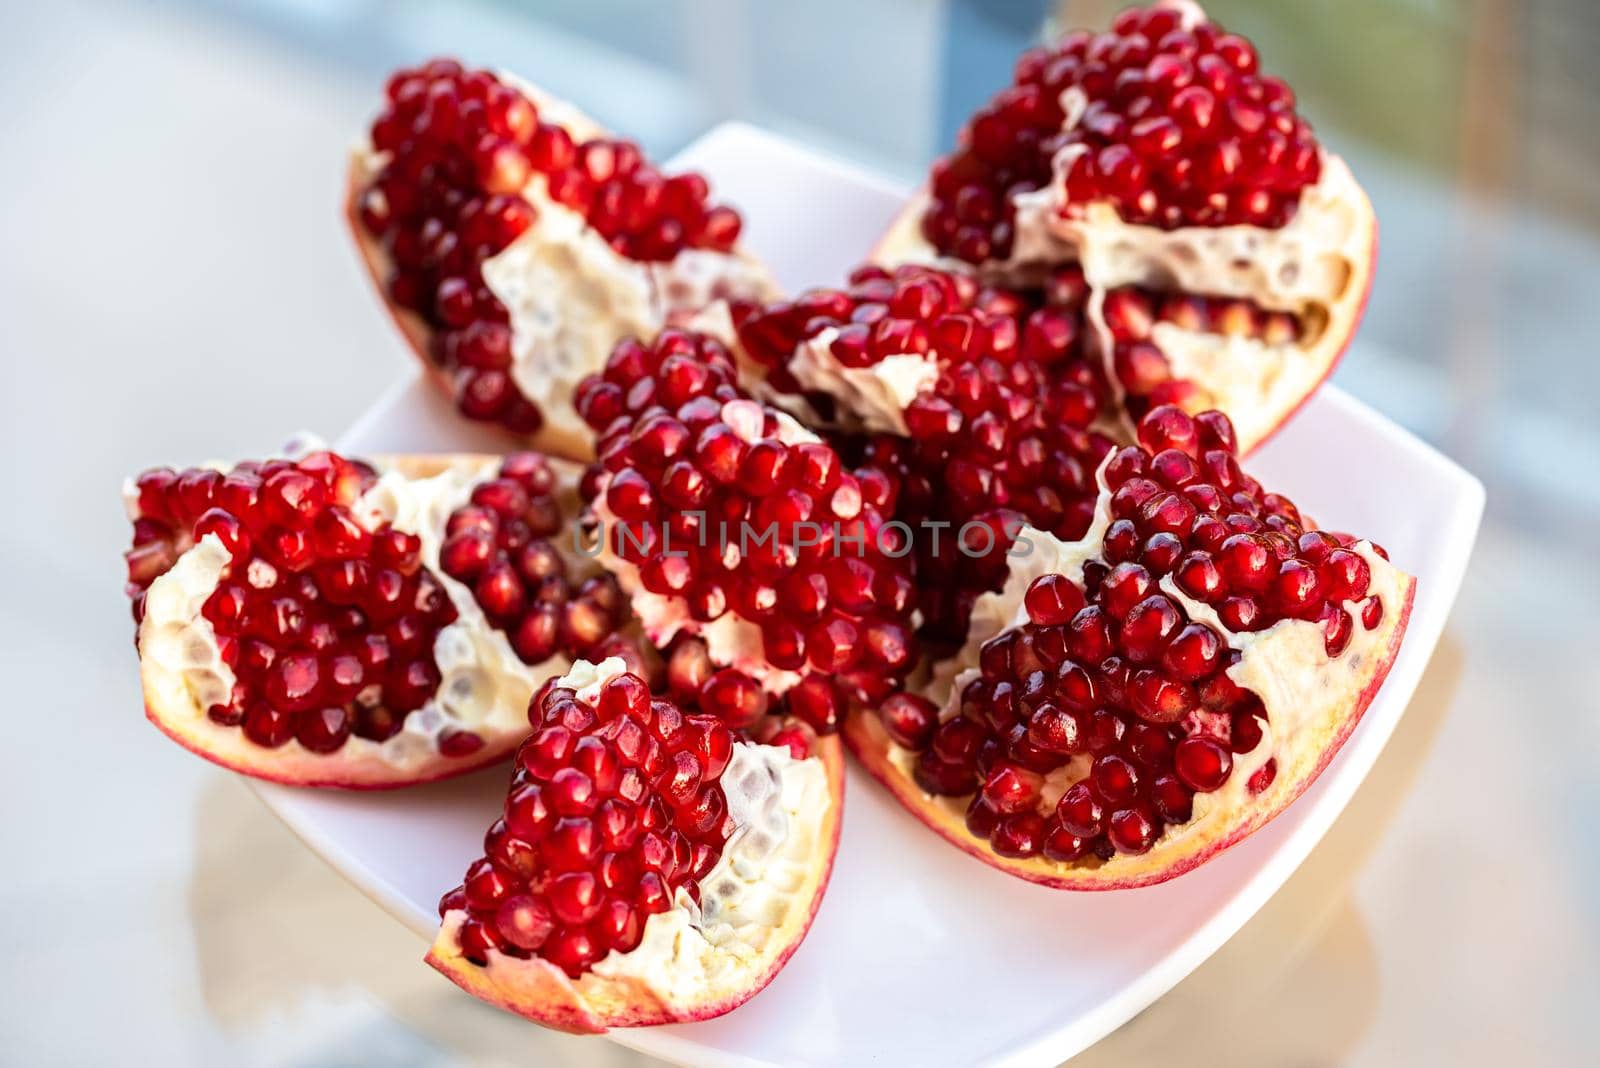 The fresh red tasty opened pomegranate on a white dish closeup